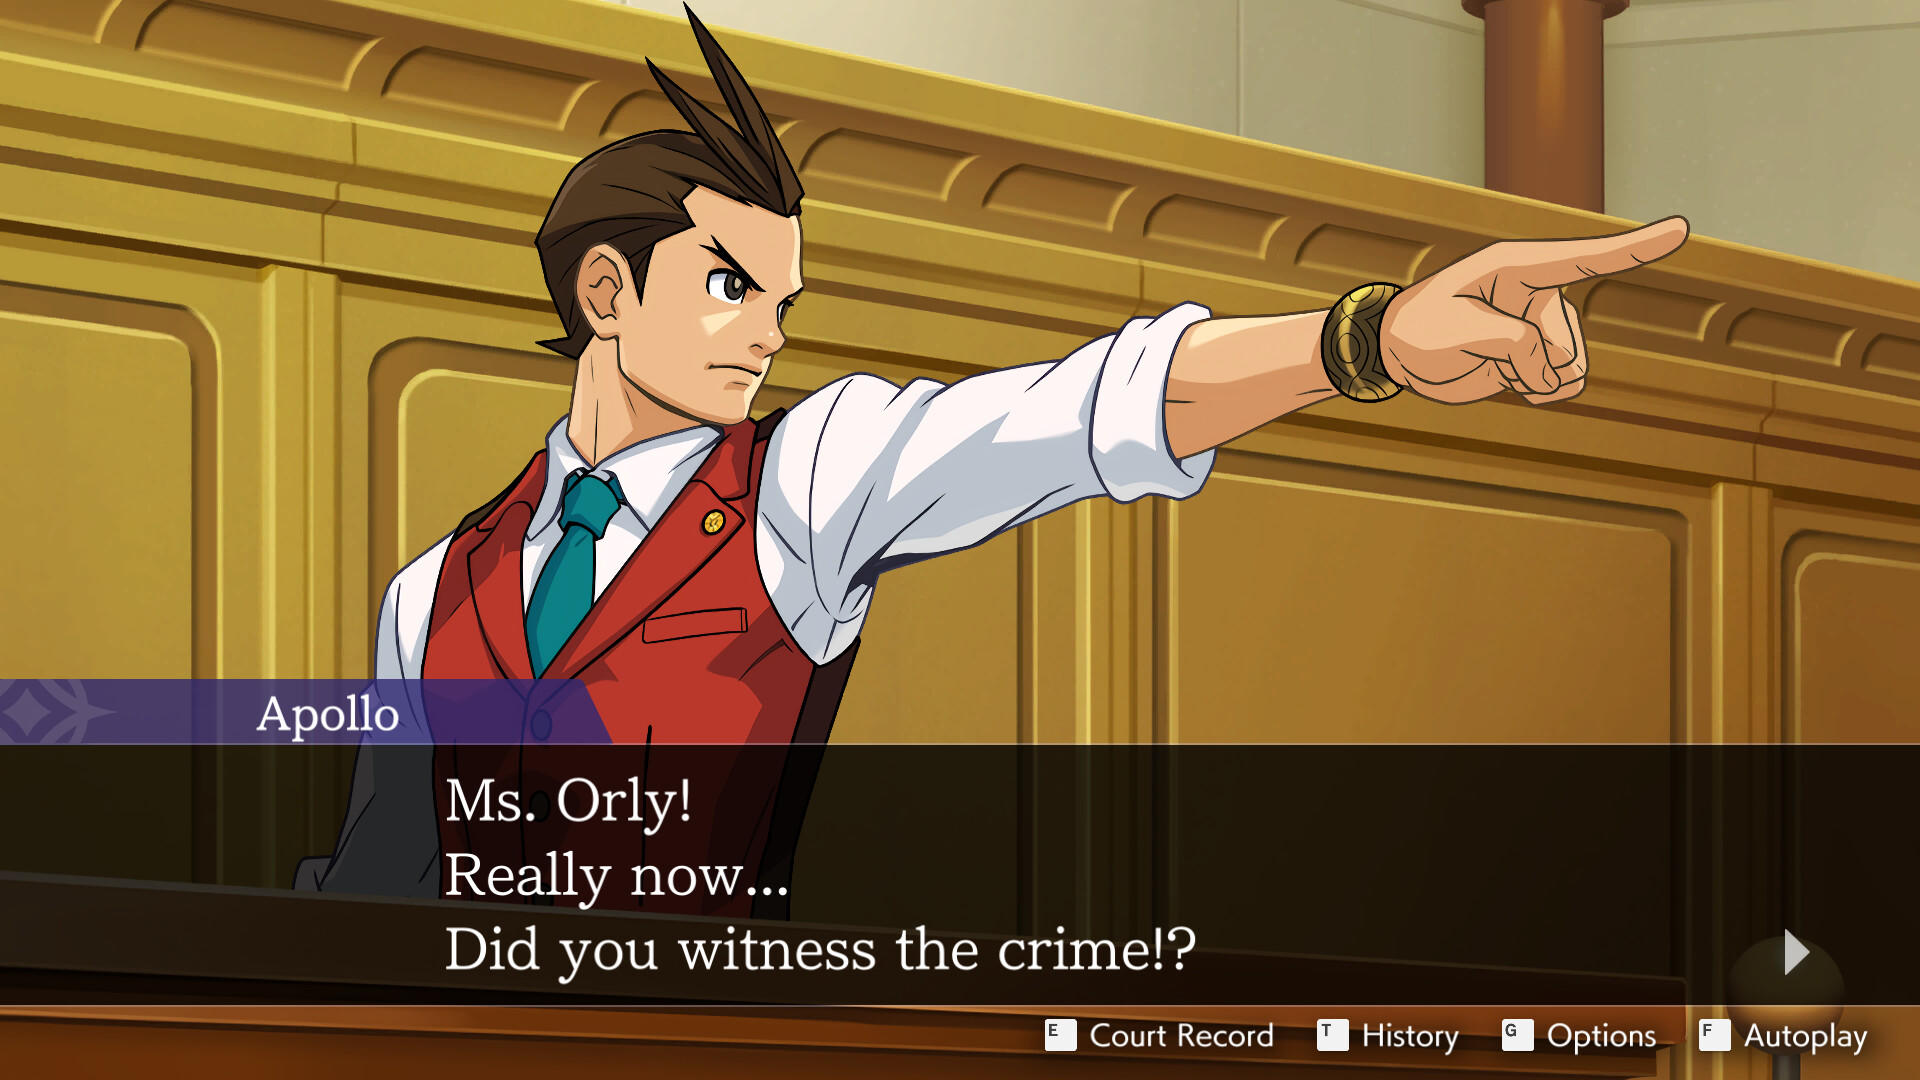 Apollo Justice: Ace Attorney Trilogy screenshot game